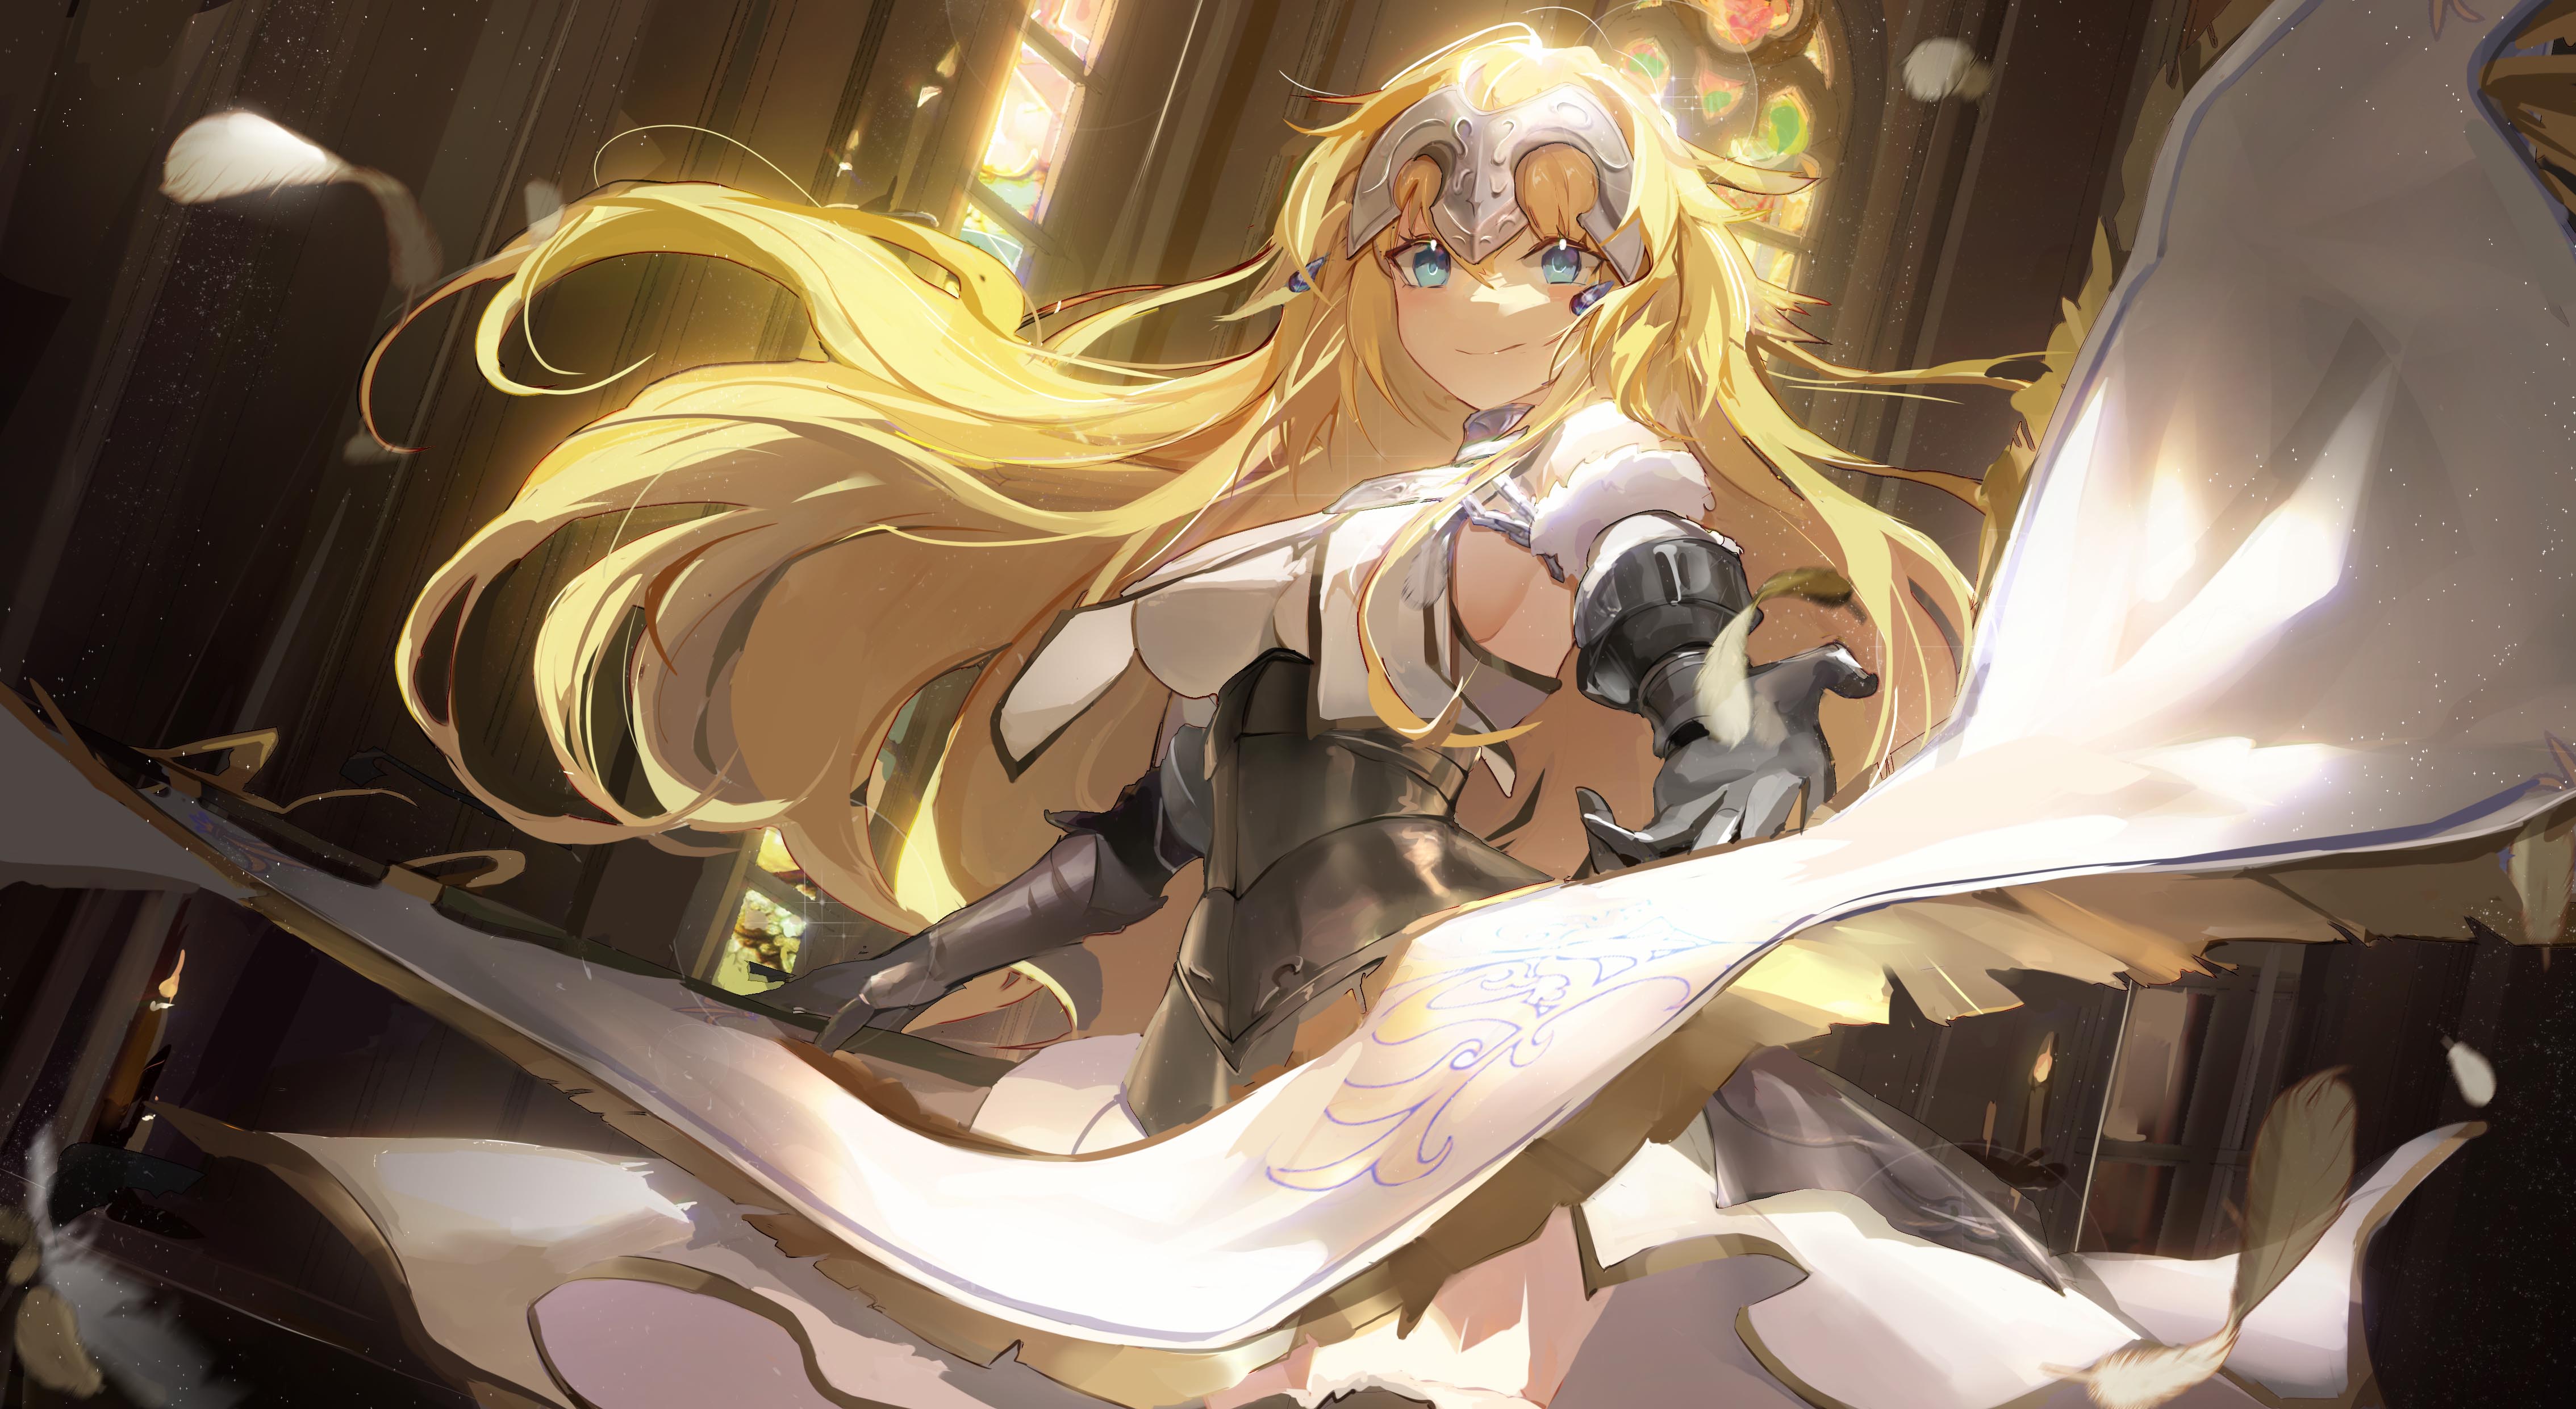 Anime 4535x2480 anime anime girls Fate series armor blue eyes blonde feathers Fate/Apocrypha  Fate/Grand Order Jeanne d'Arc (Fate) Ruler (Fate/Grand Order)